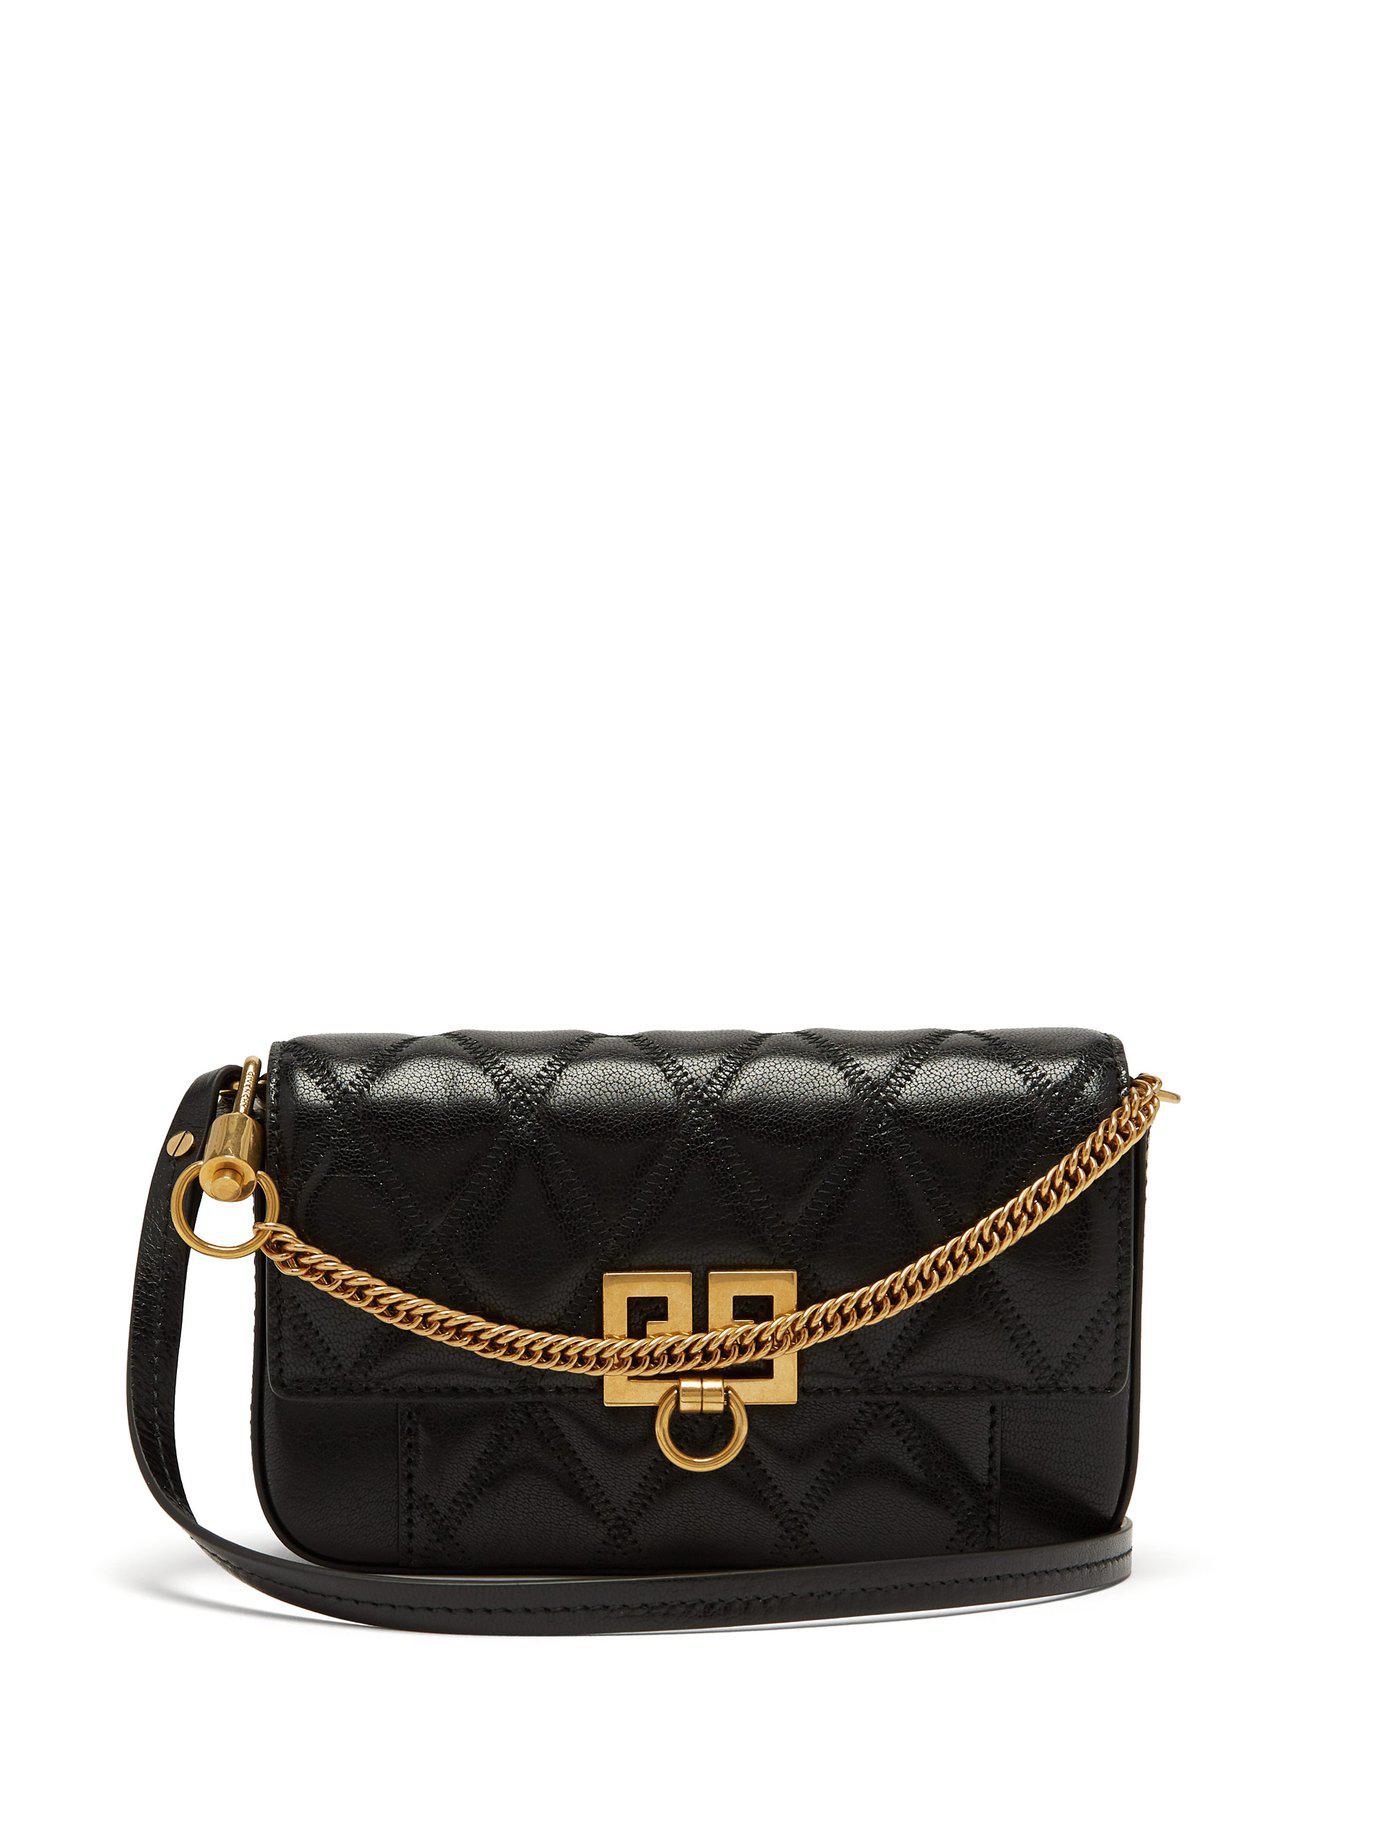 Givenchy Pocket Quilted Leather Cross Body Bag in Black - Lyst